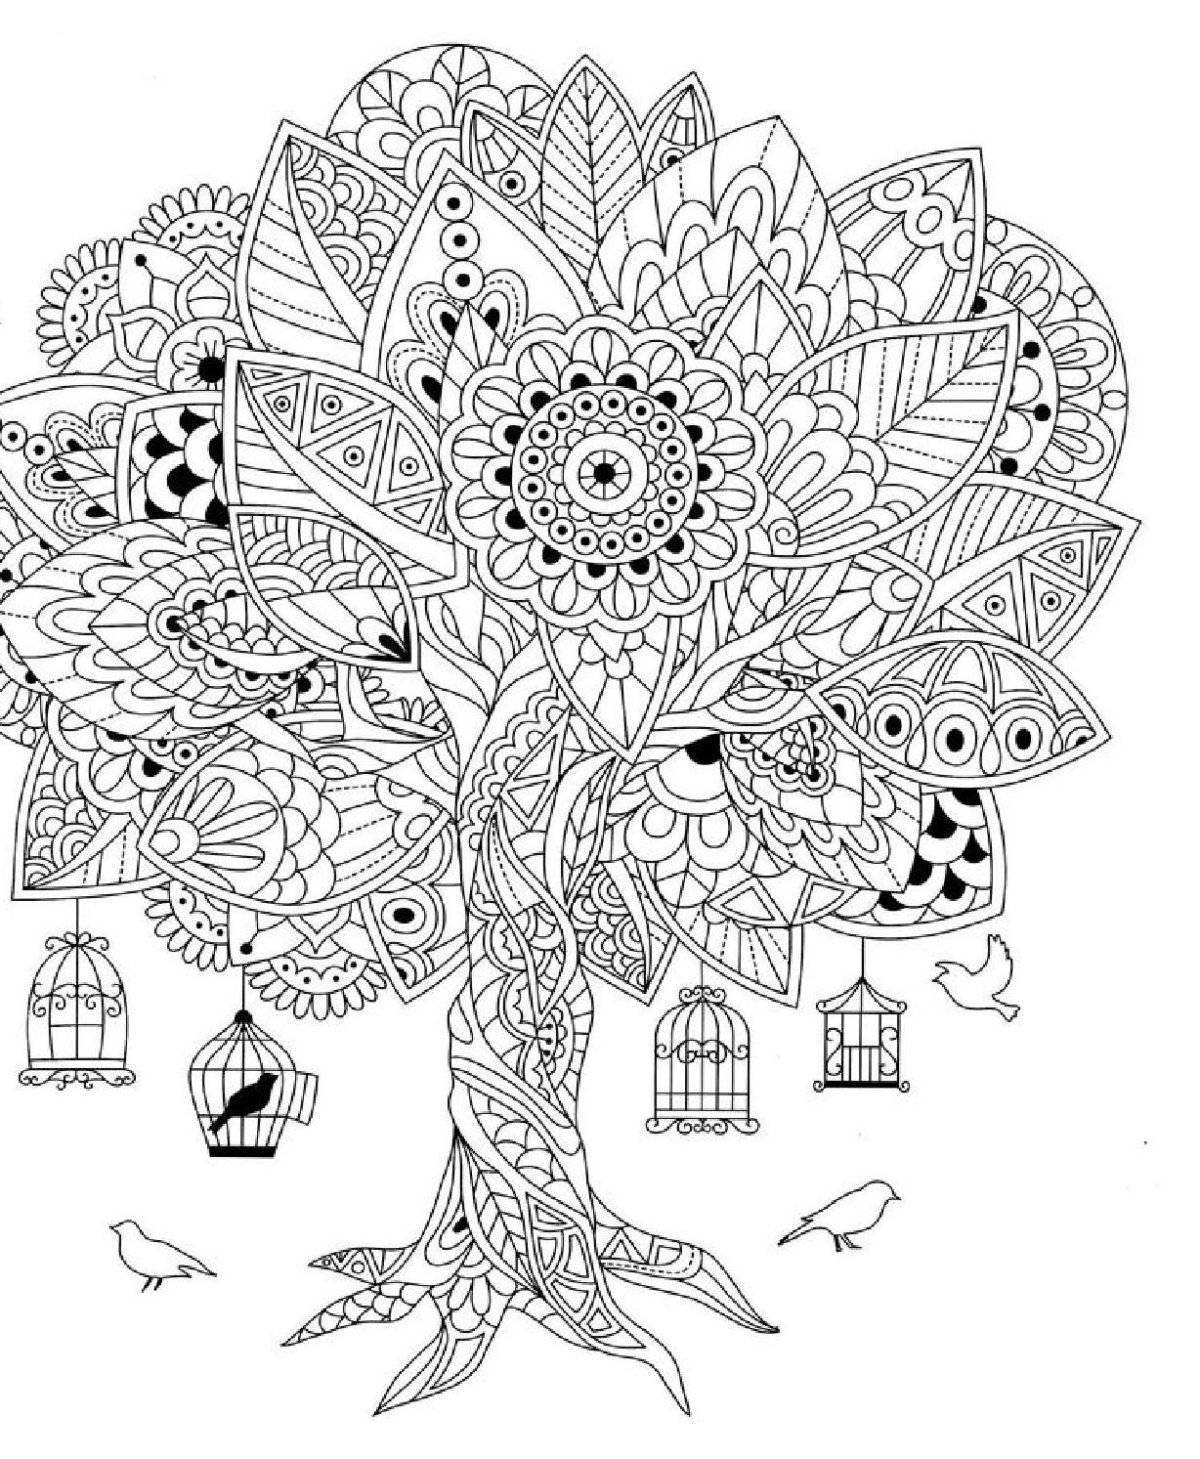 Relaxing coloring book relax antistress for adults